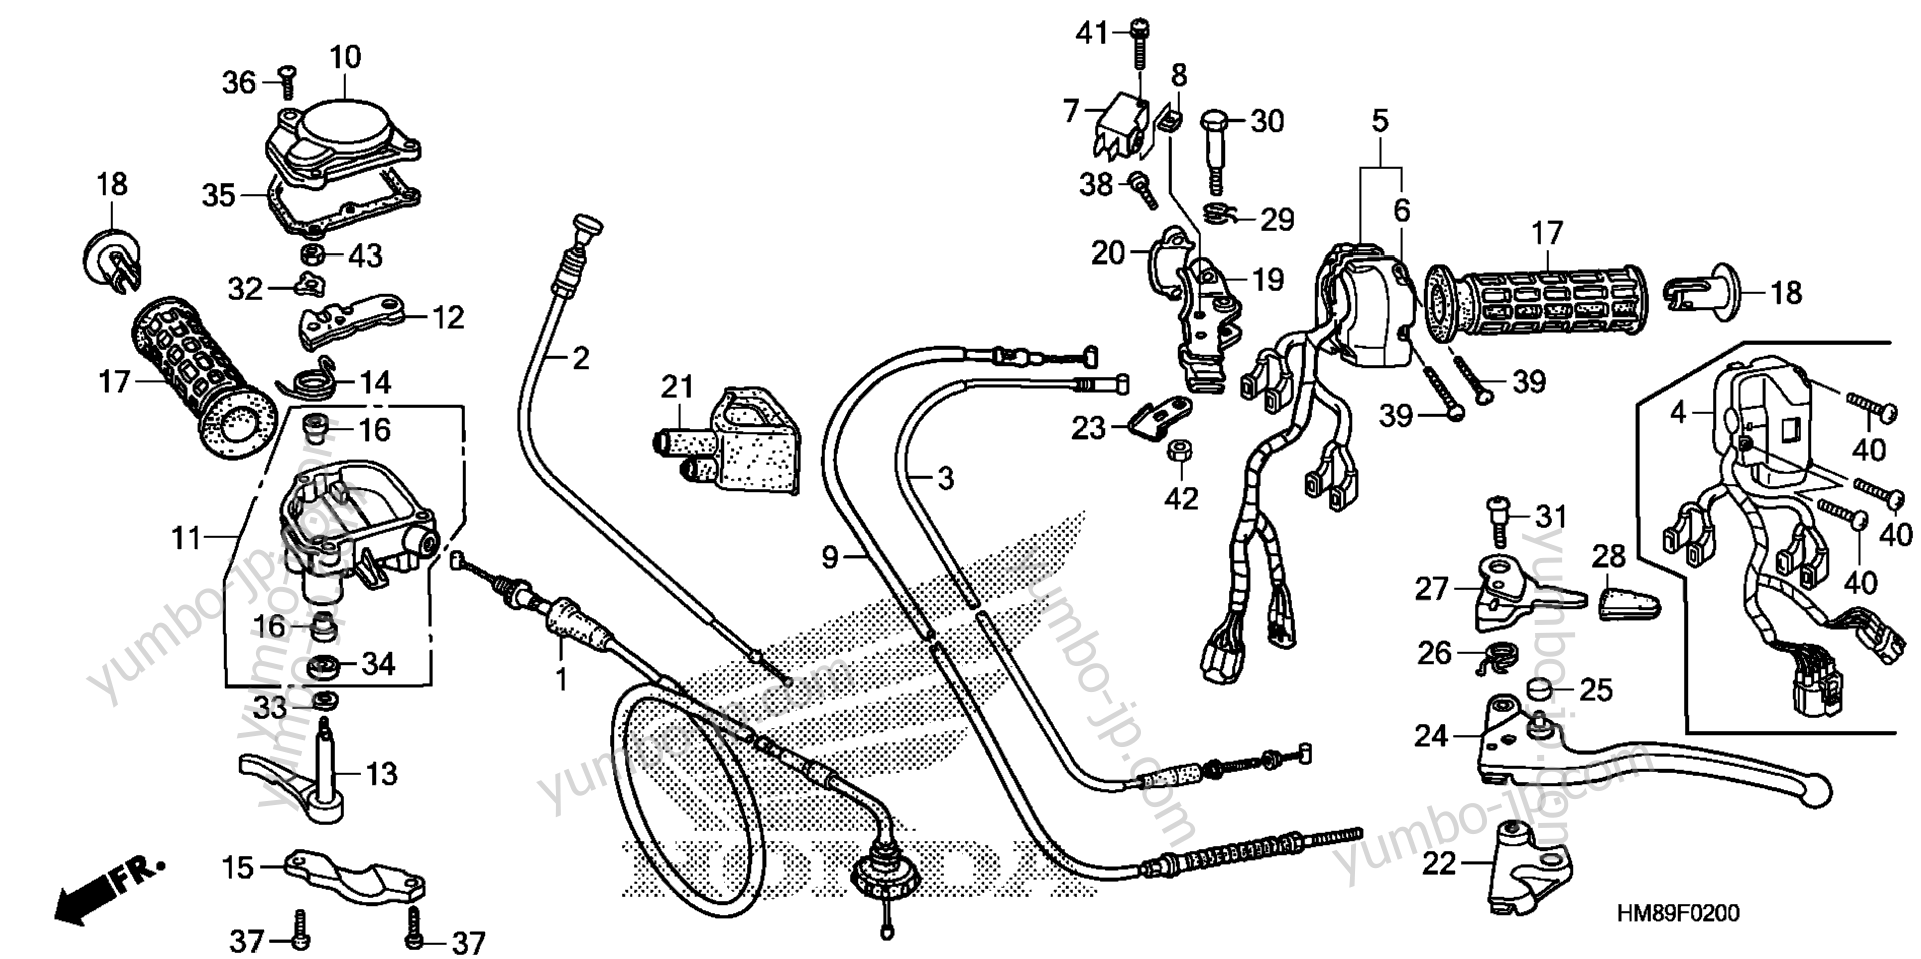 HANDLE LEVER / SWITCH / CABLE for ATVs HONDA TRX250TM A 2012 year